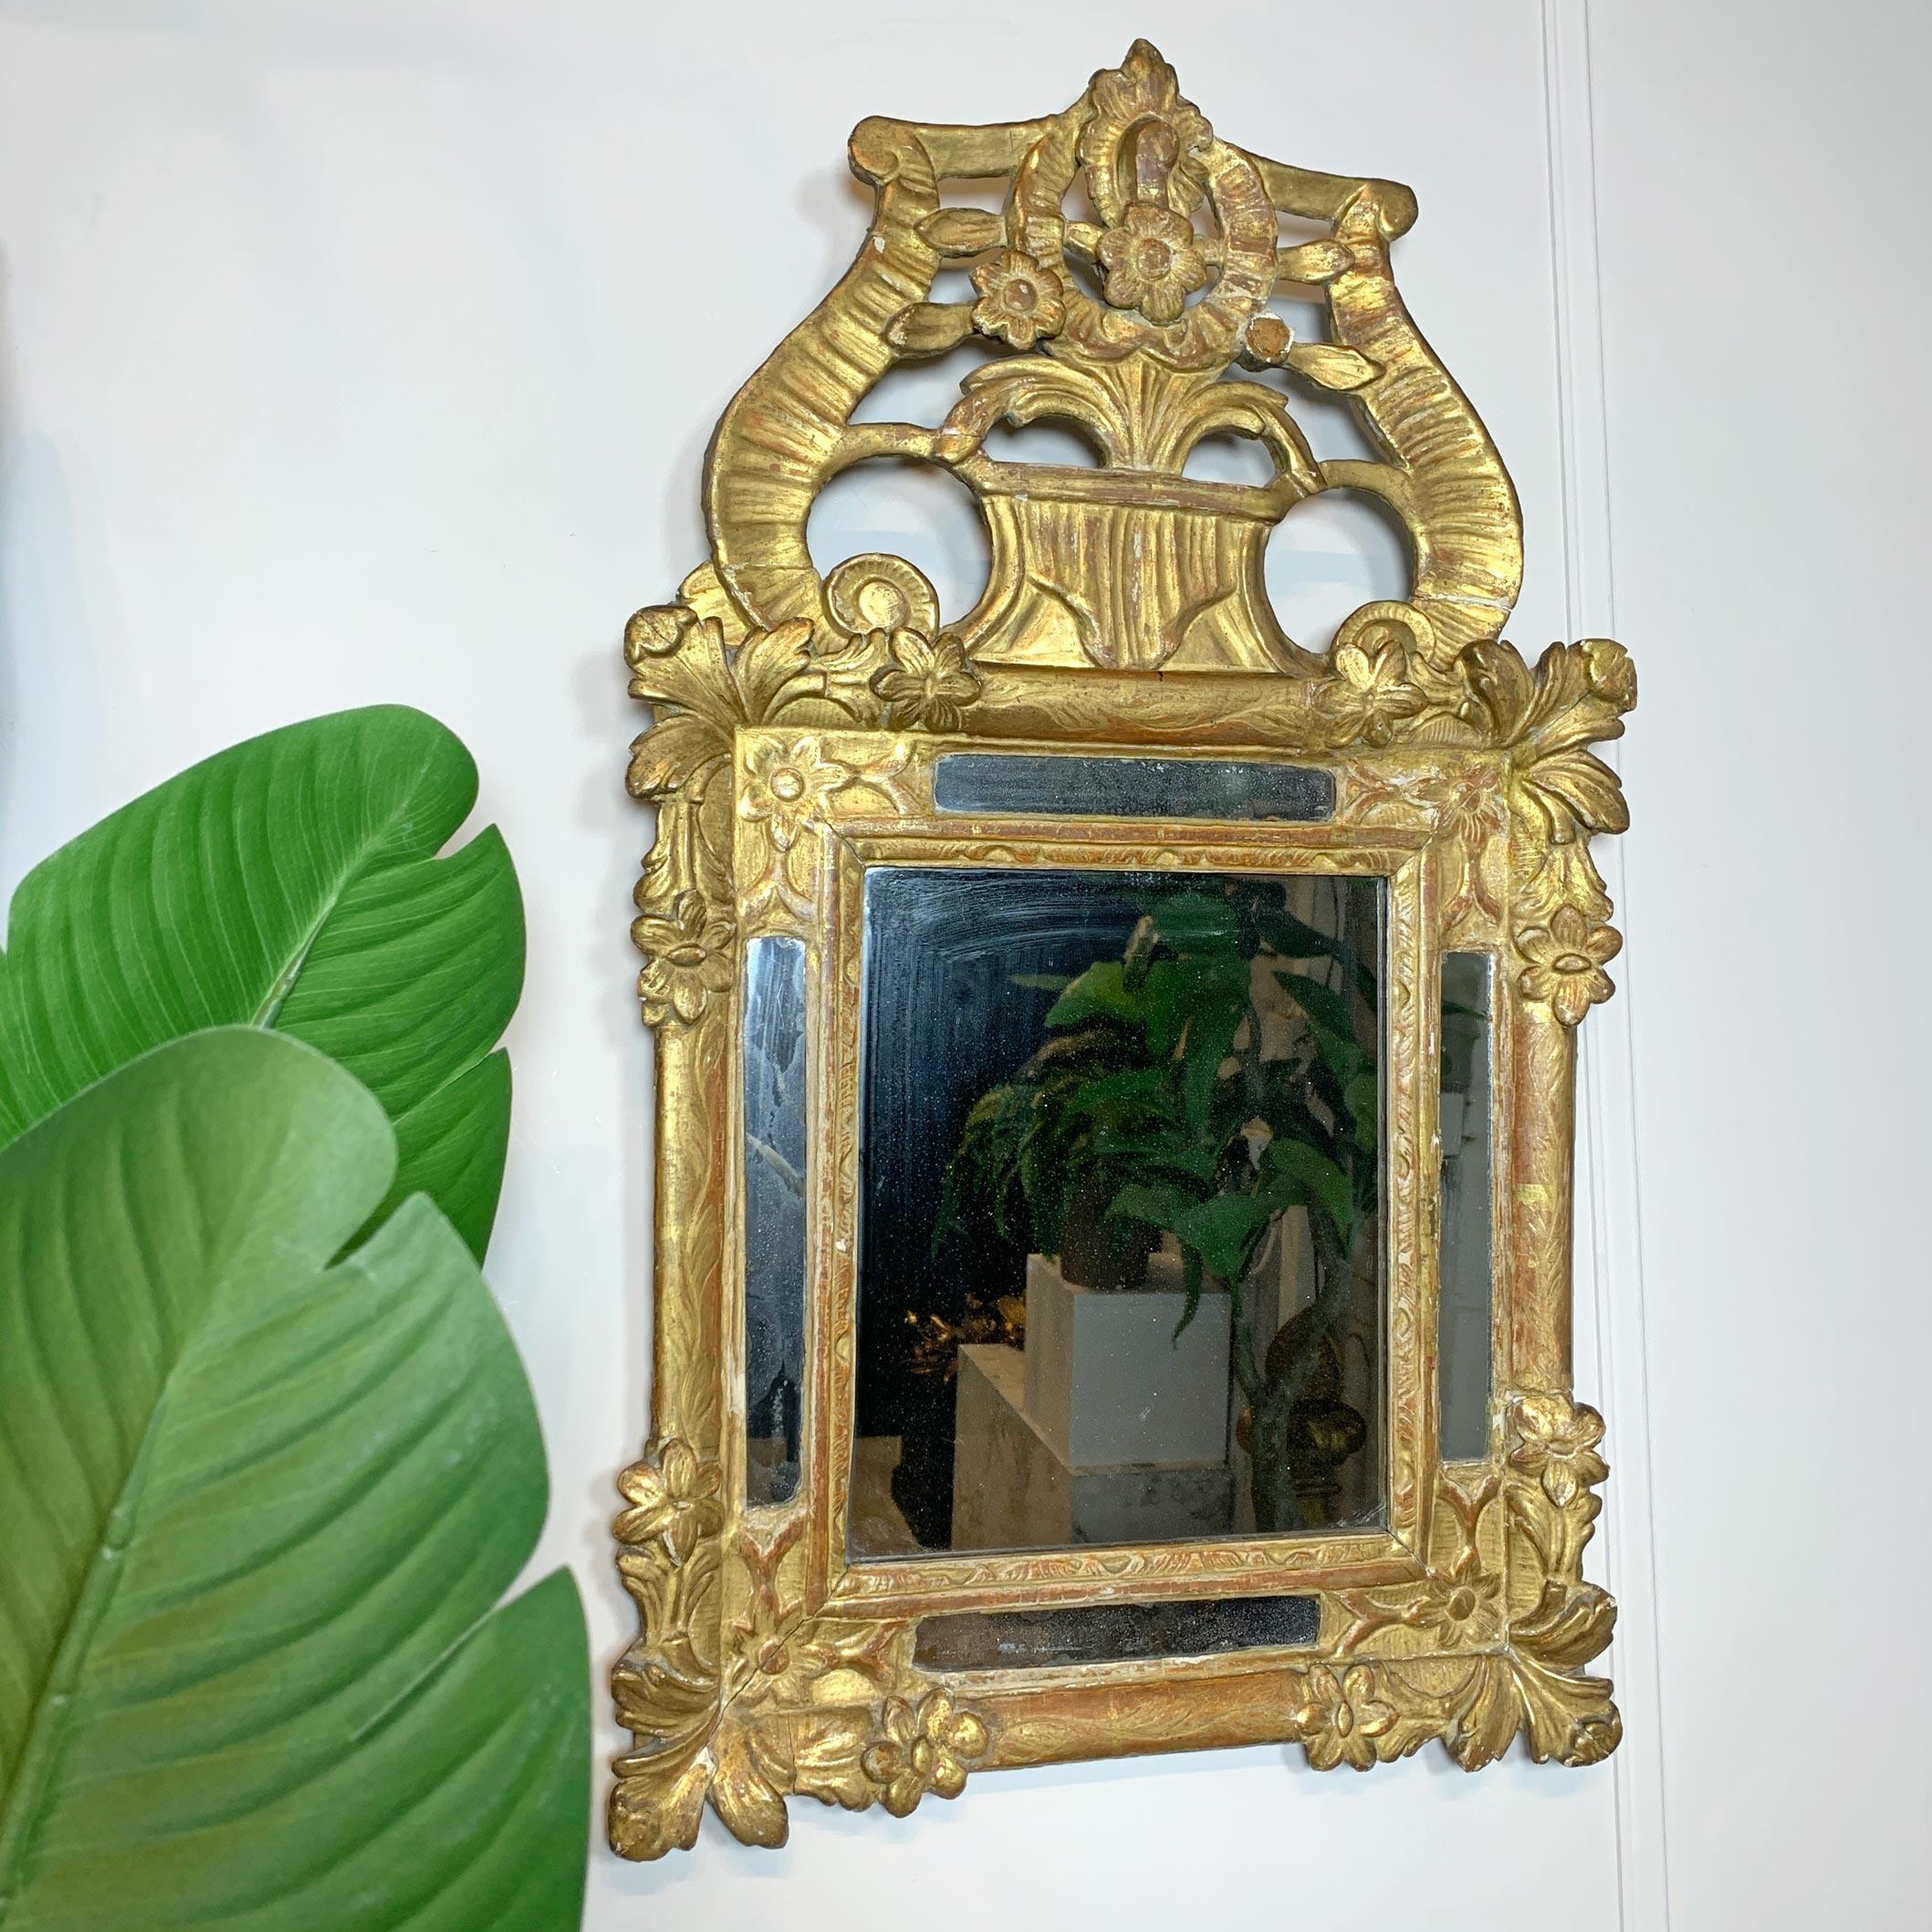 Beautiful marriage mirror, in the Rococo style, dating to the late 18th century, all original mercury plate, and removable decorative pelmet, in giltwood and gesso.

Minor losses to the pelmet and some small cracking to the gesso, commensurate